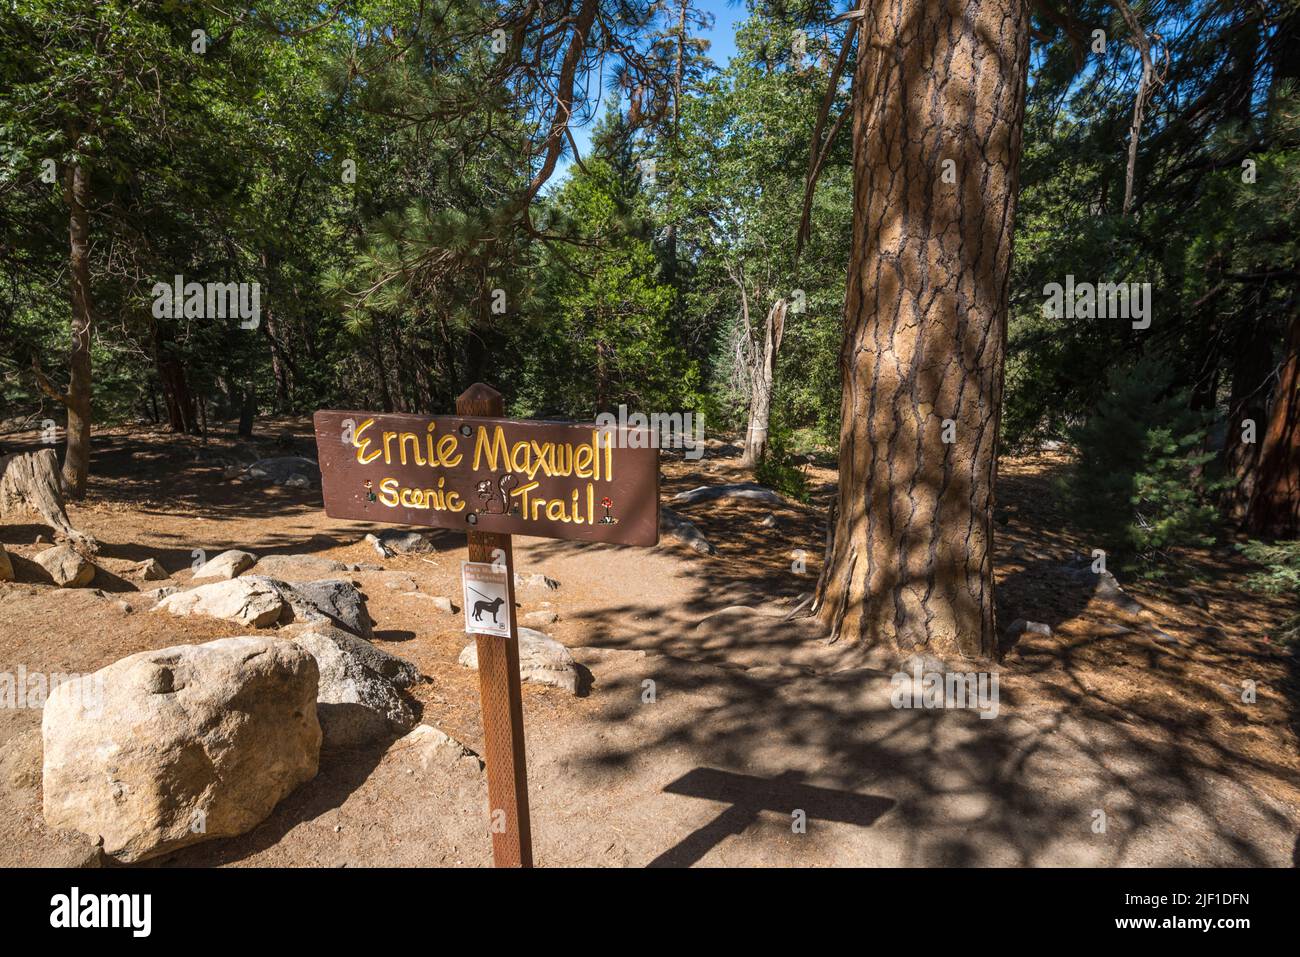 Ernie Maxwell Scenic Trail sign in Humber Park. Idyllwild, California. Stock Photo